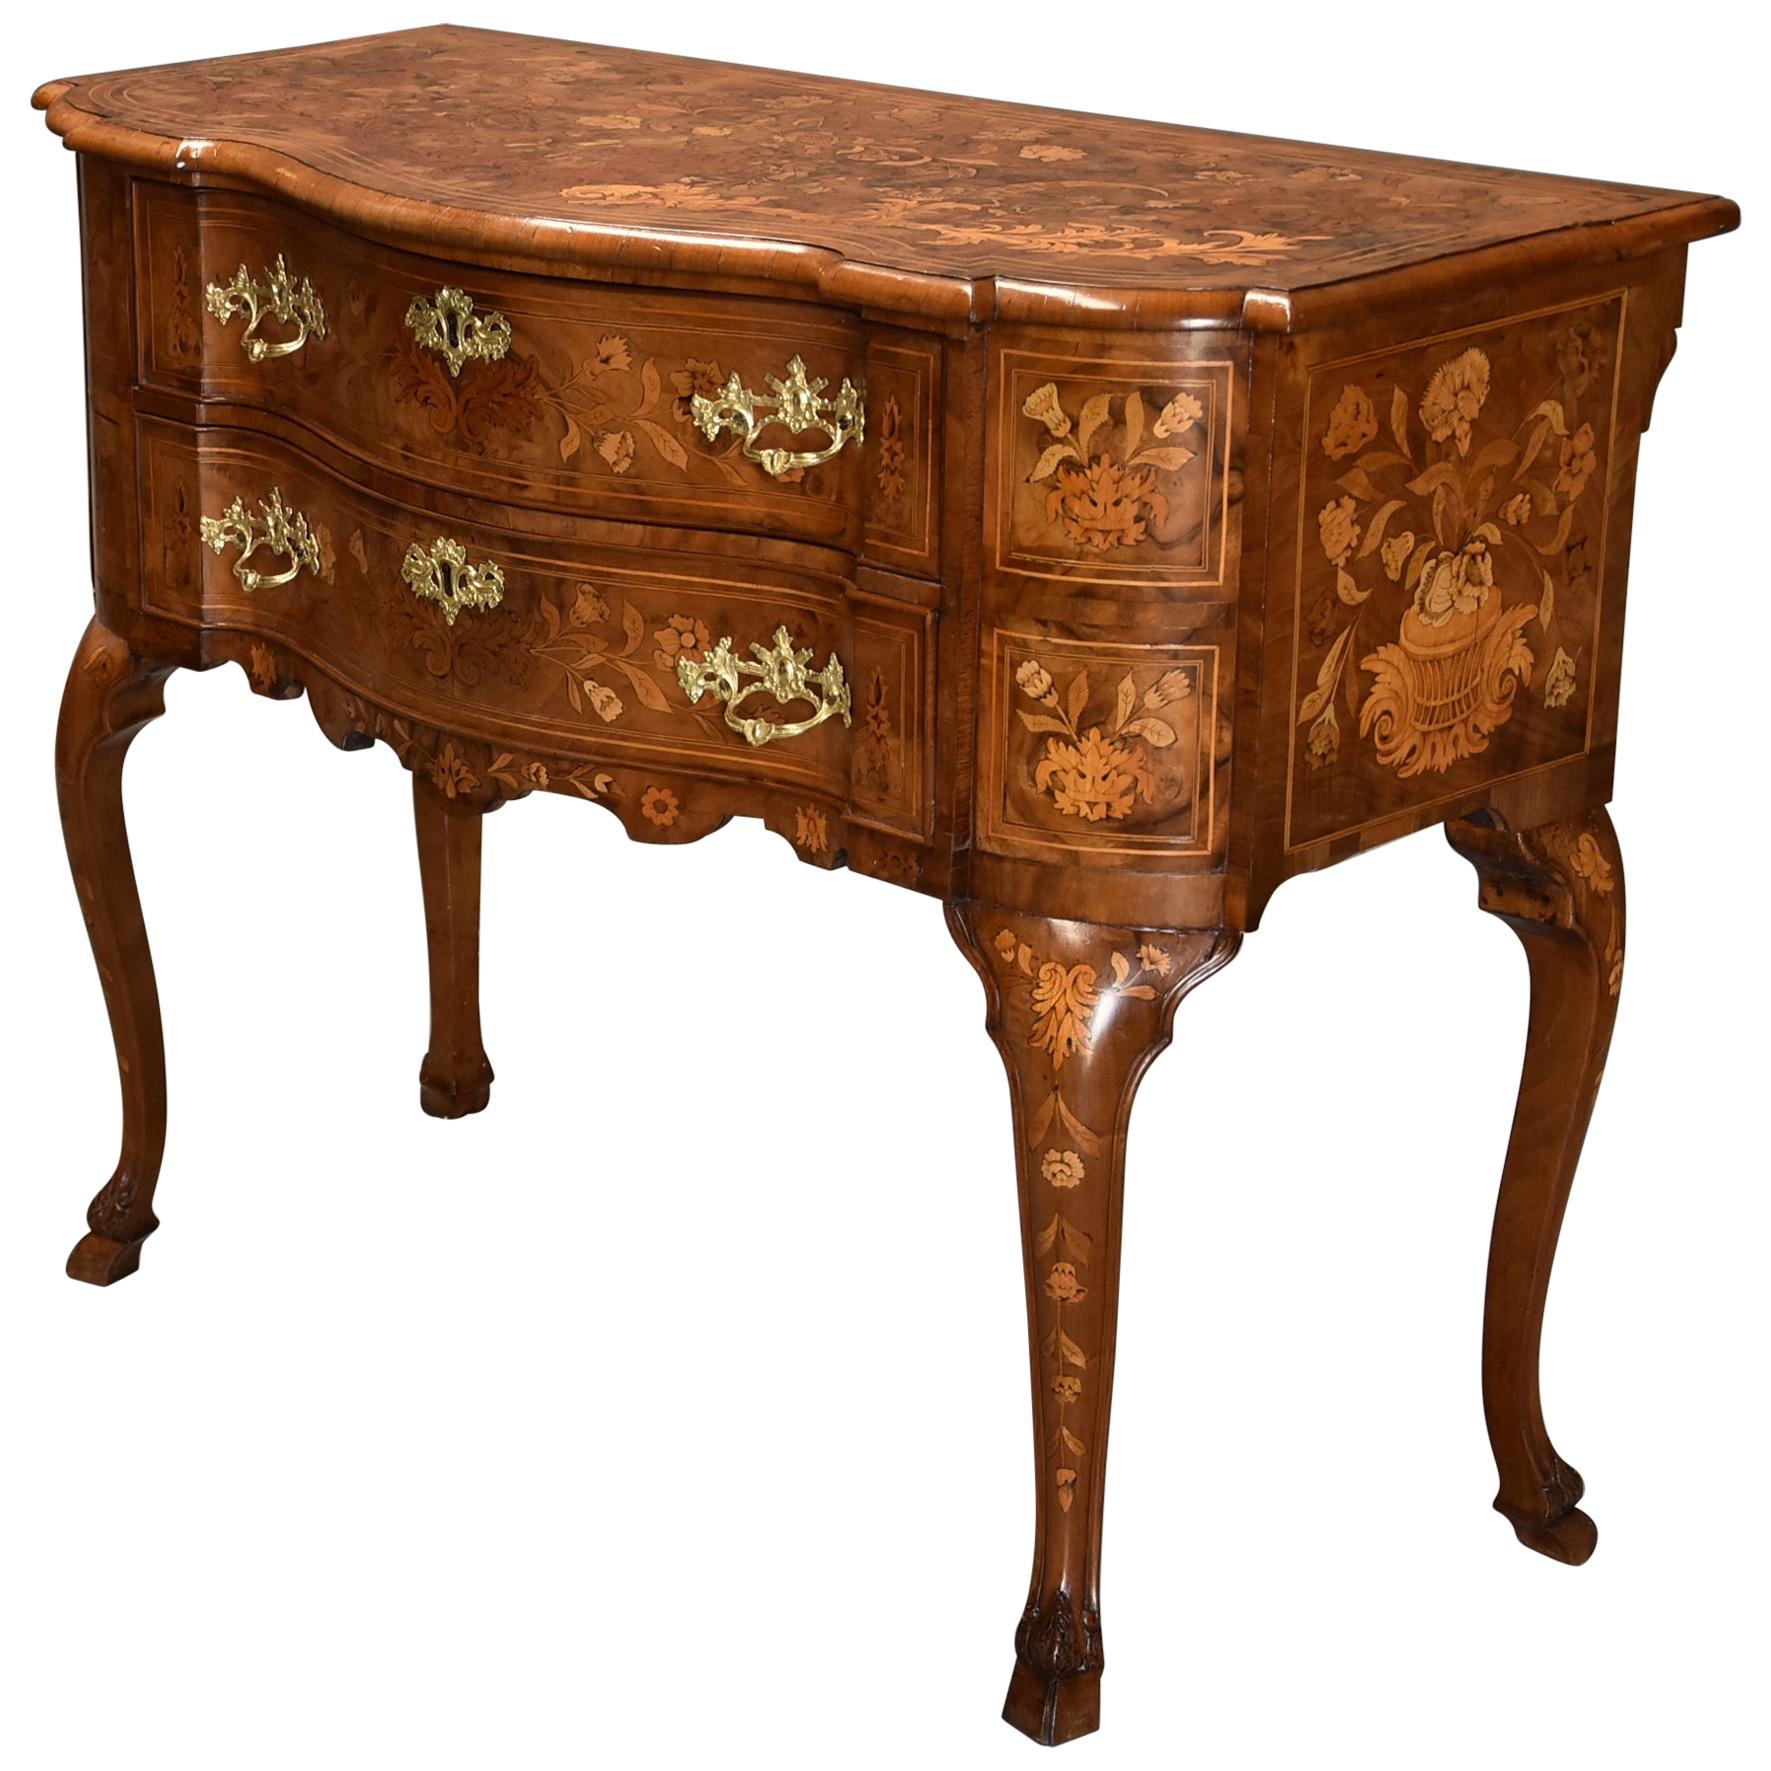 Fine Quality Mid-19th Century Floral Marquetry Walnut Lowboy of Serpentine Form For Sale